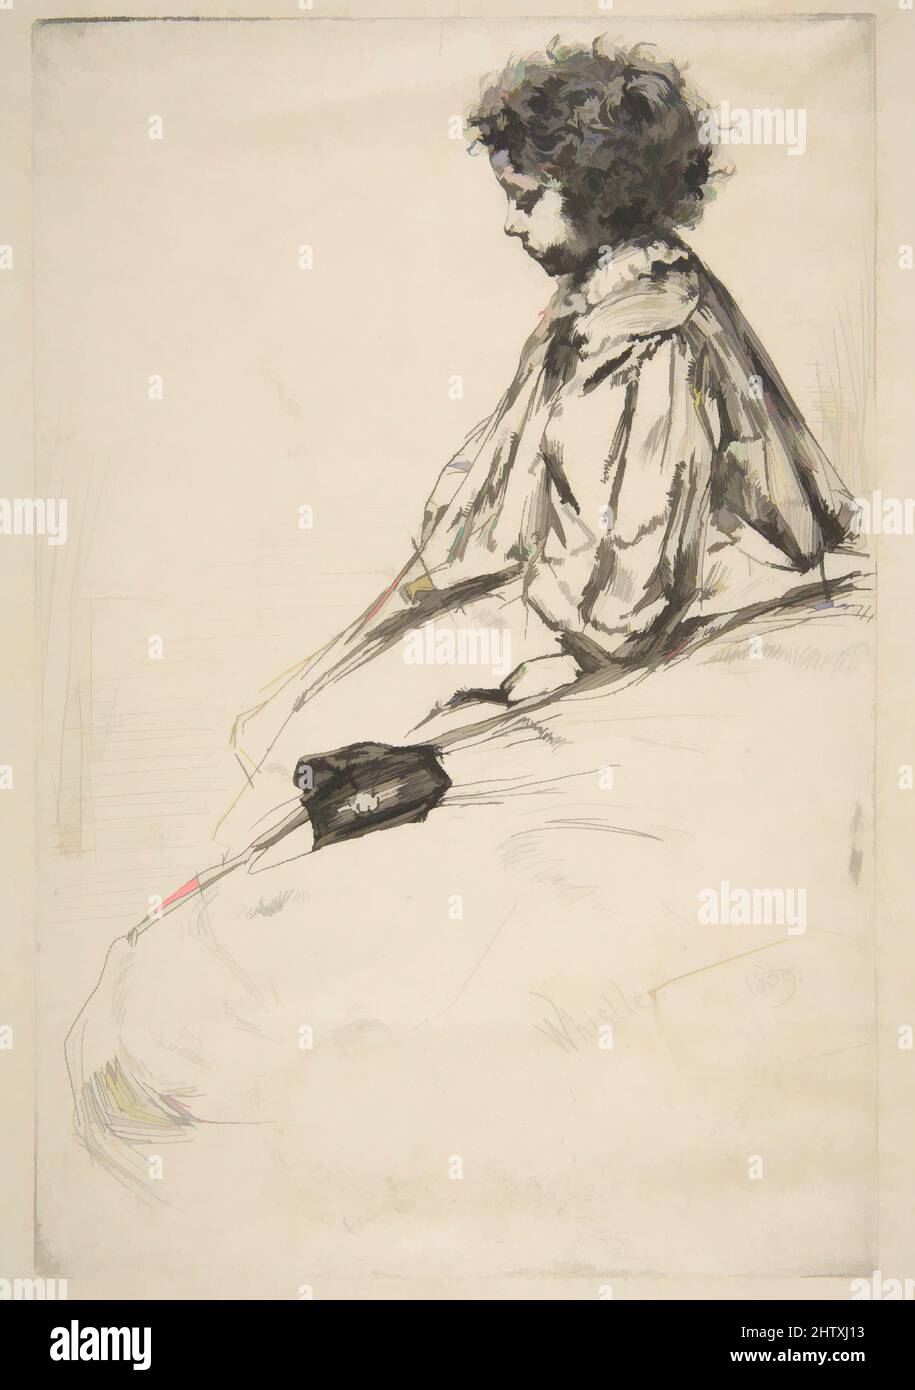 Art inspired by Bibi Lalouette, 1859, Etching and drypoint; second state of two, with the scratch (Glasgow), printed in black ink on thin laid fibrous ivory Japan paper, Plate: 8 15/16 x 6 in. (22.7 x 15.2 cm), Prints, James McNeill Whistler (American, Lowell, Massachusetts 1834–1903, Classic works modernized by Artotop with a splash of modernity. Shapes, color and value, eye-catching visual impact on art. Emotions through freedom of artworks in a contemporary way. A timeless message pursuing a wildly creative new direction. Artists turning to the digital medium and creating the Artotop NFT Stock Photo